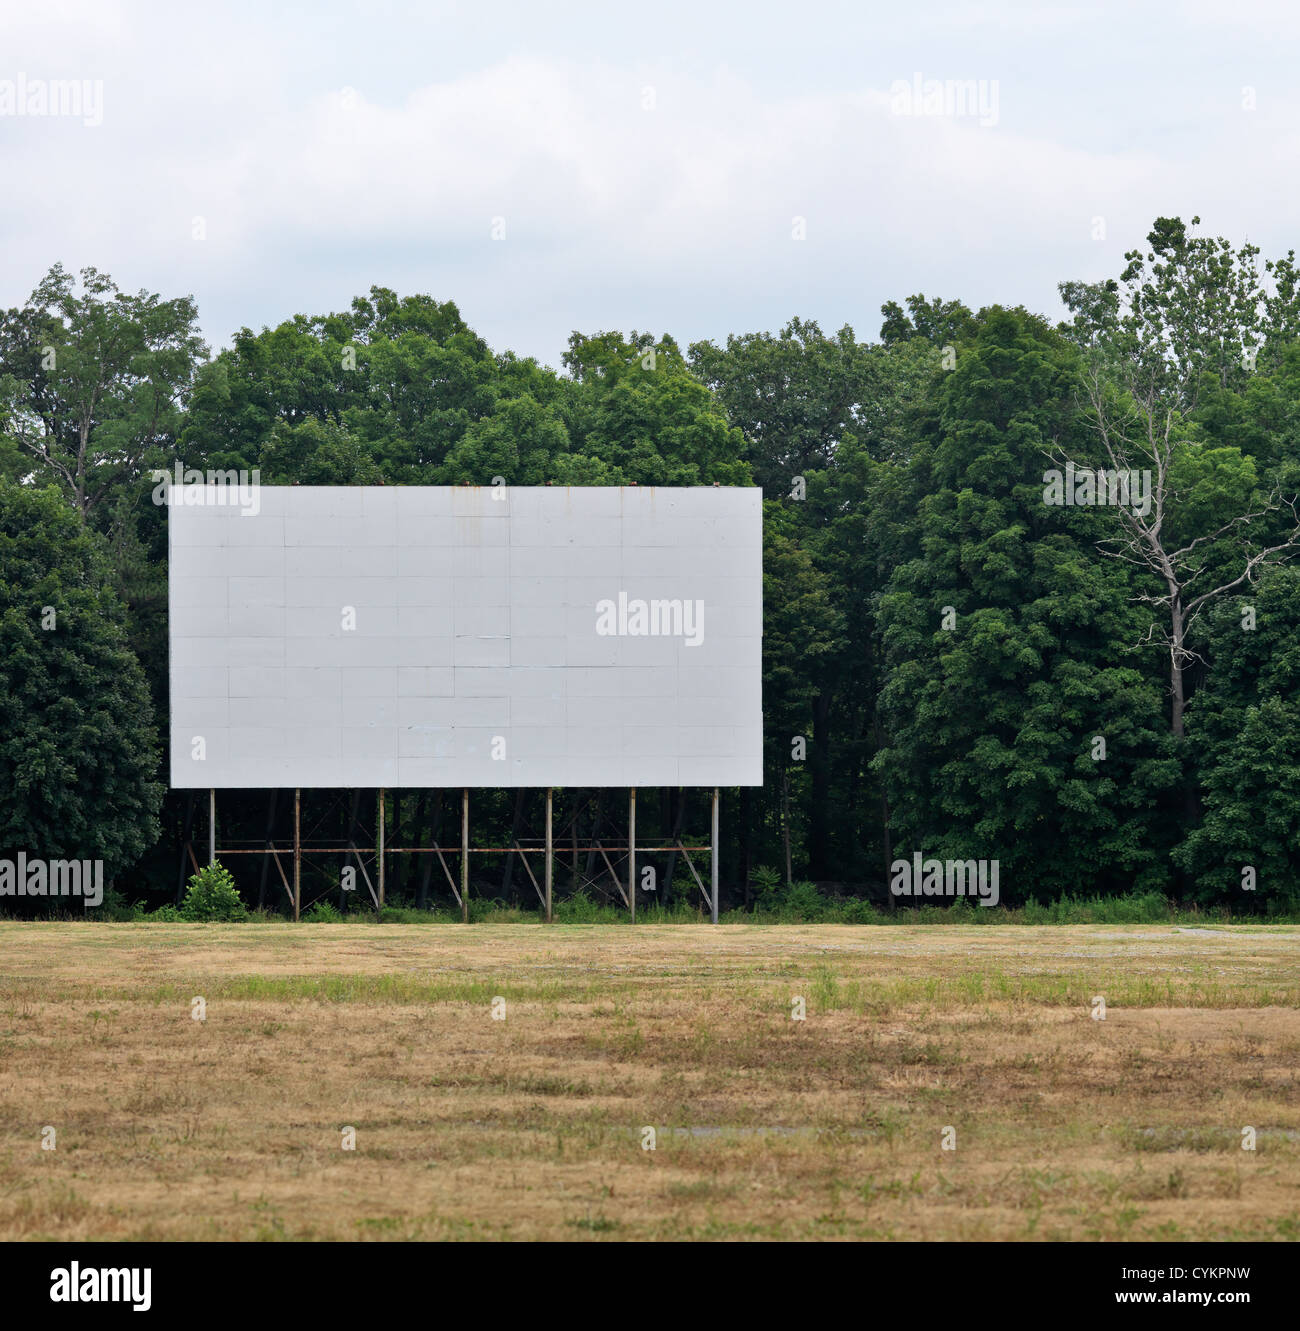 Blank white sign in field Banque D'Images